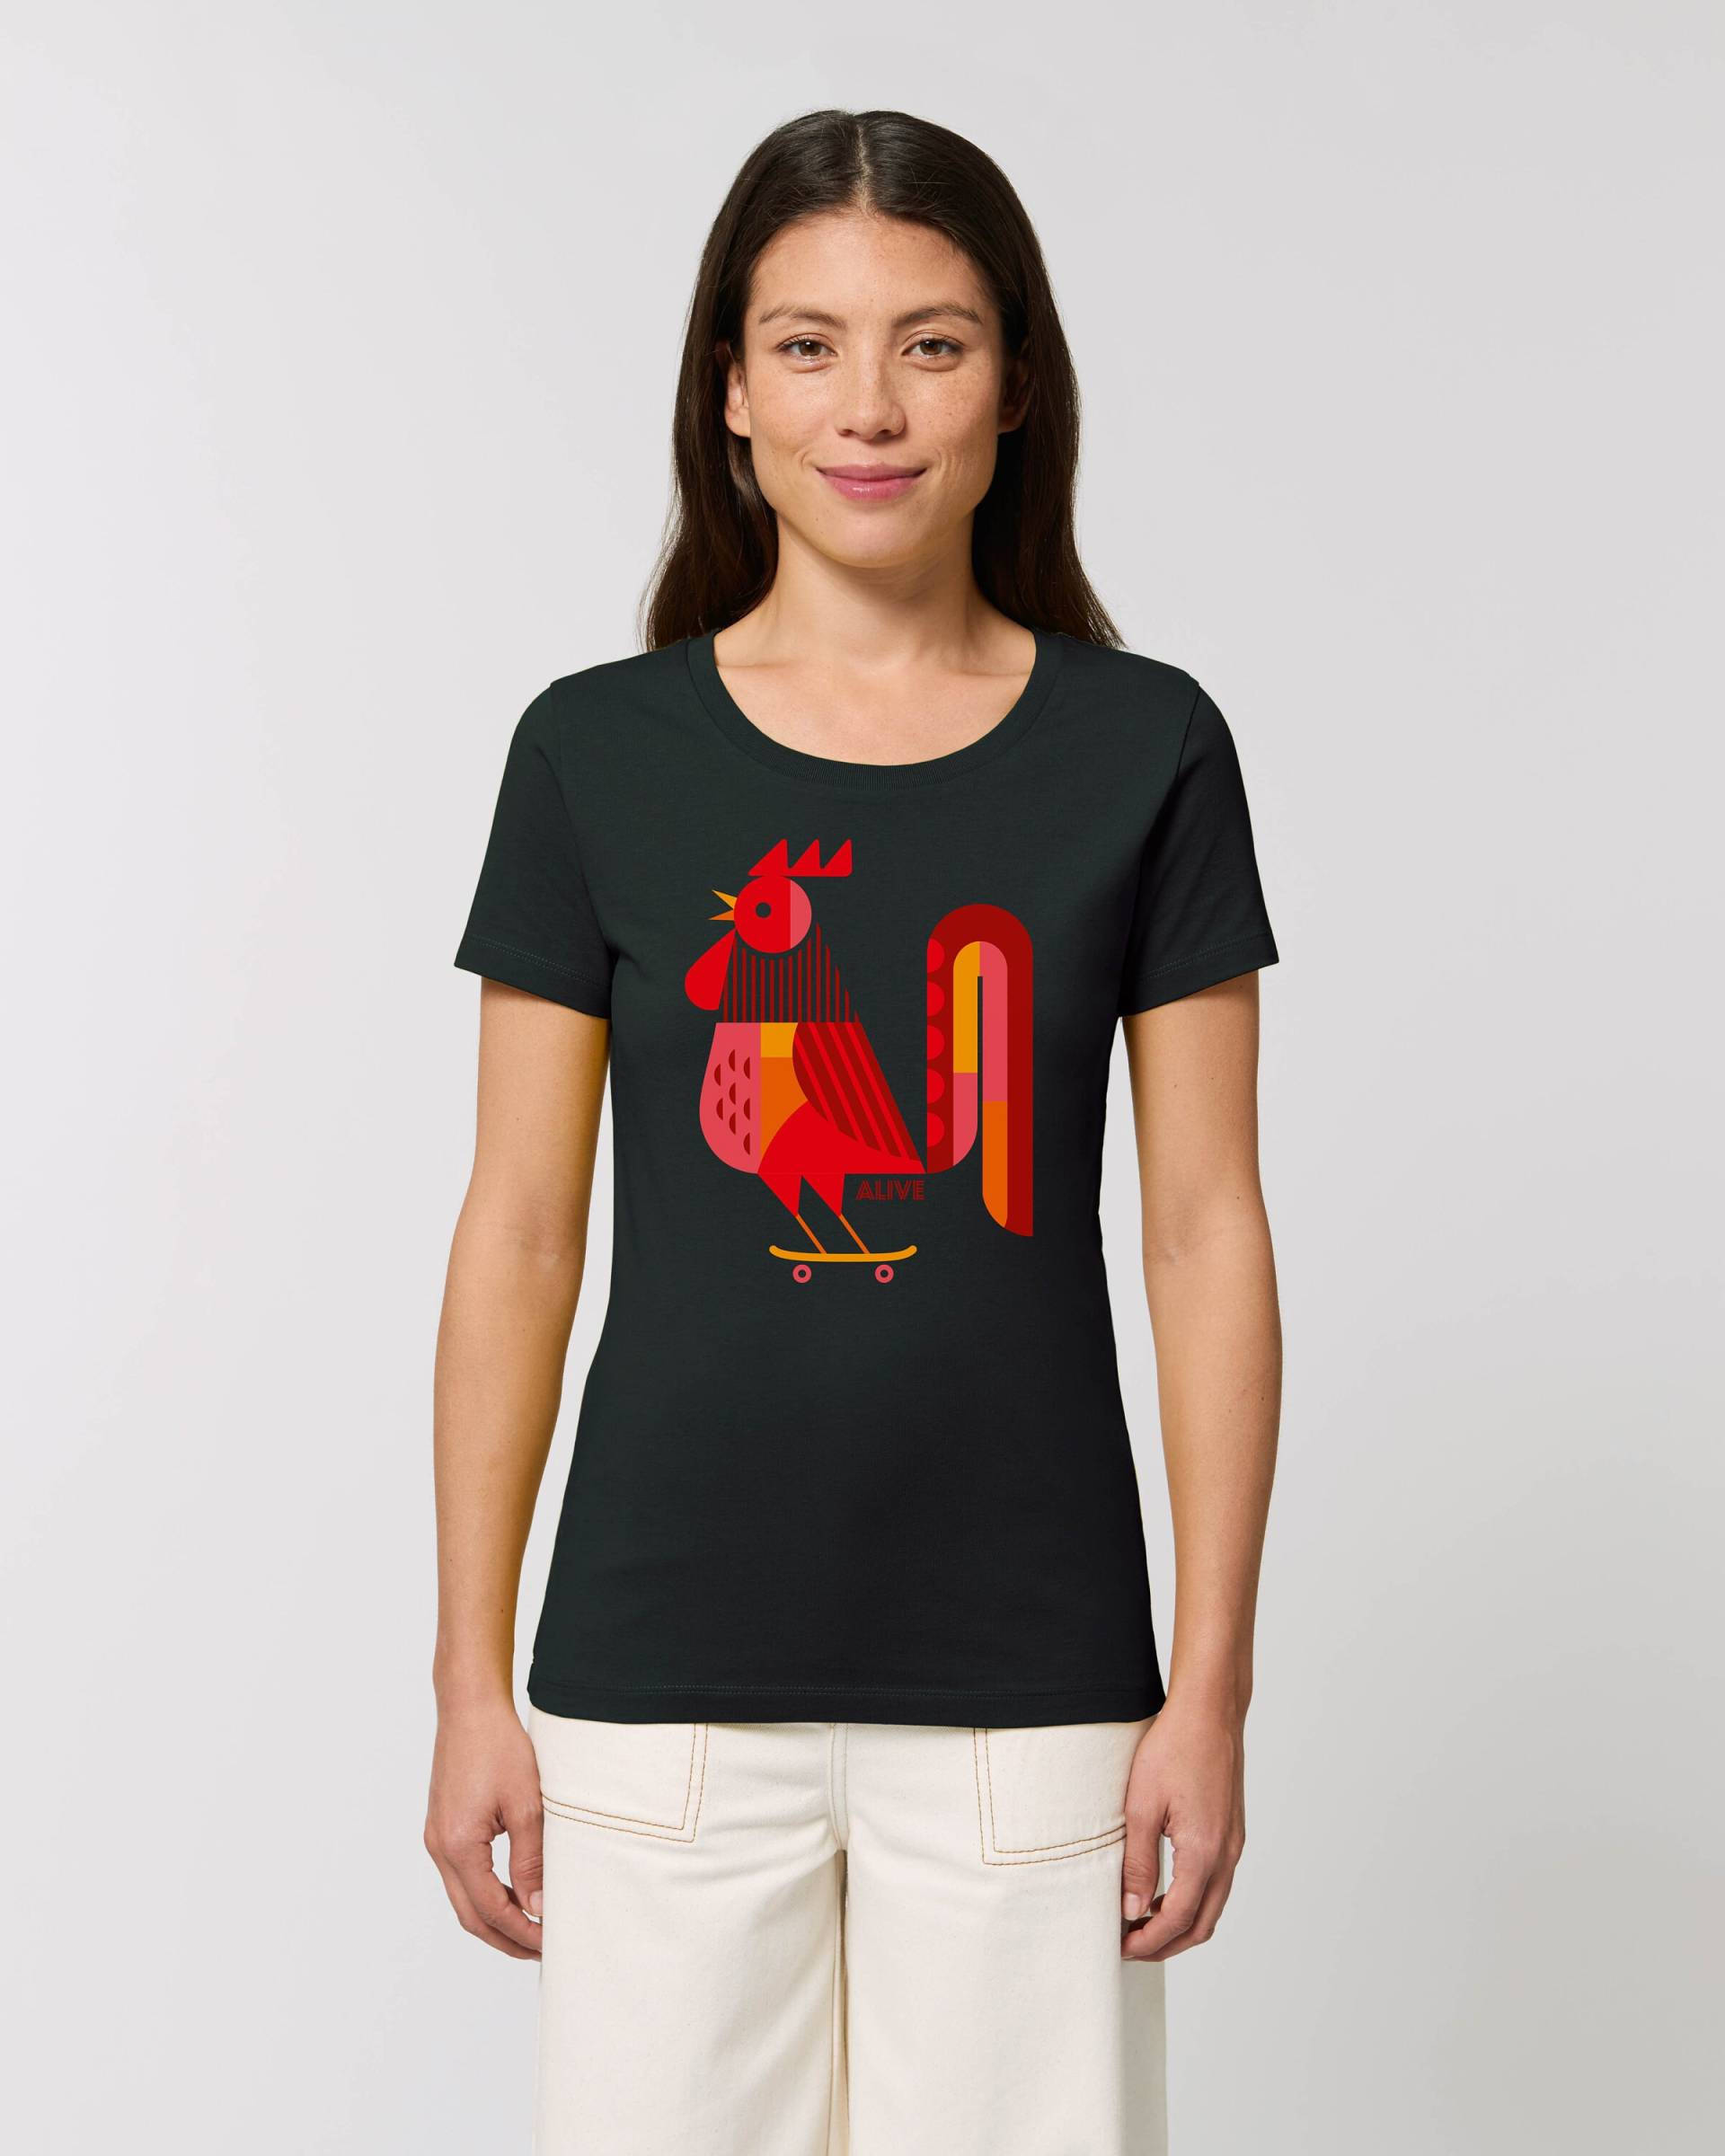 Rollin Rooster T-Shirt Girls von AliveClothingShirts